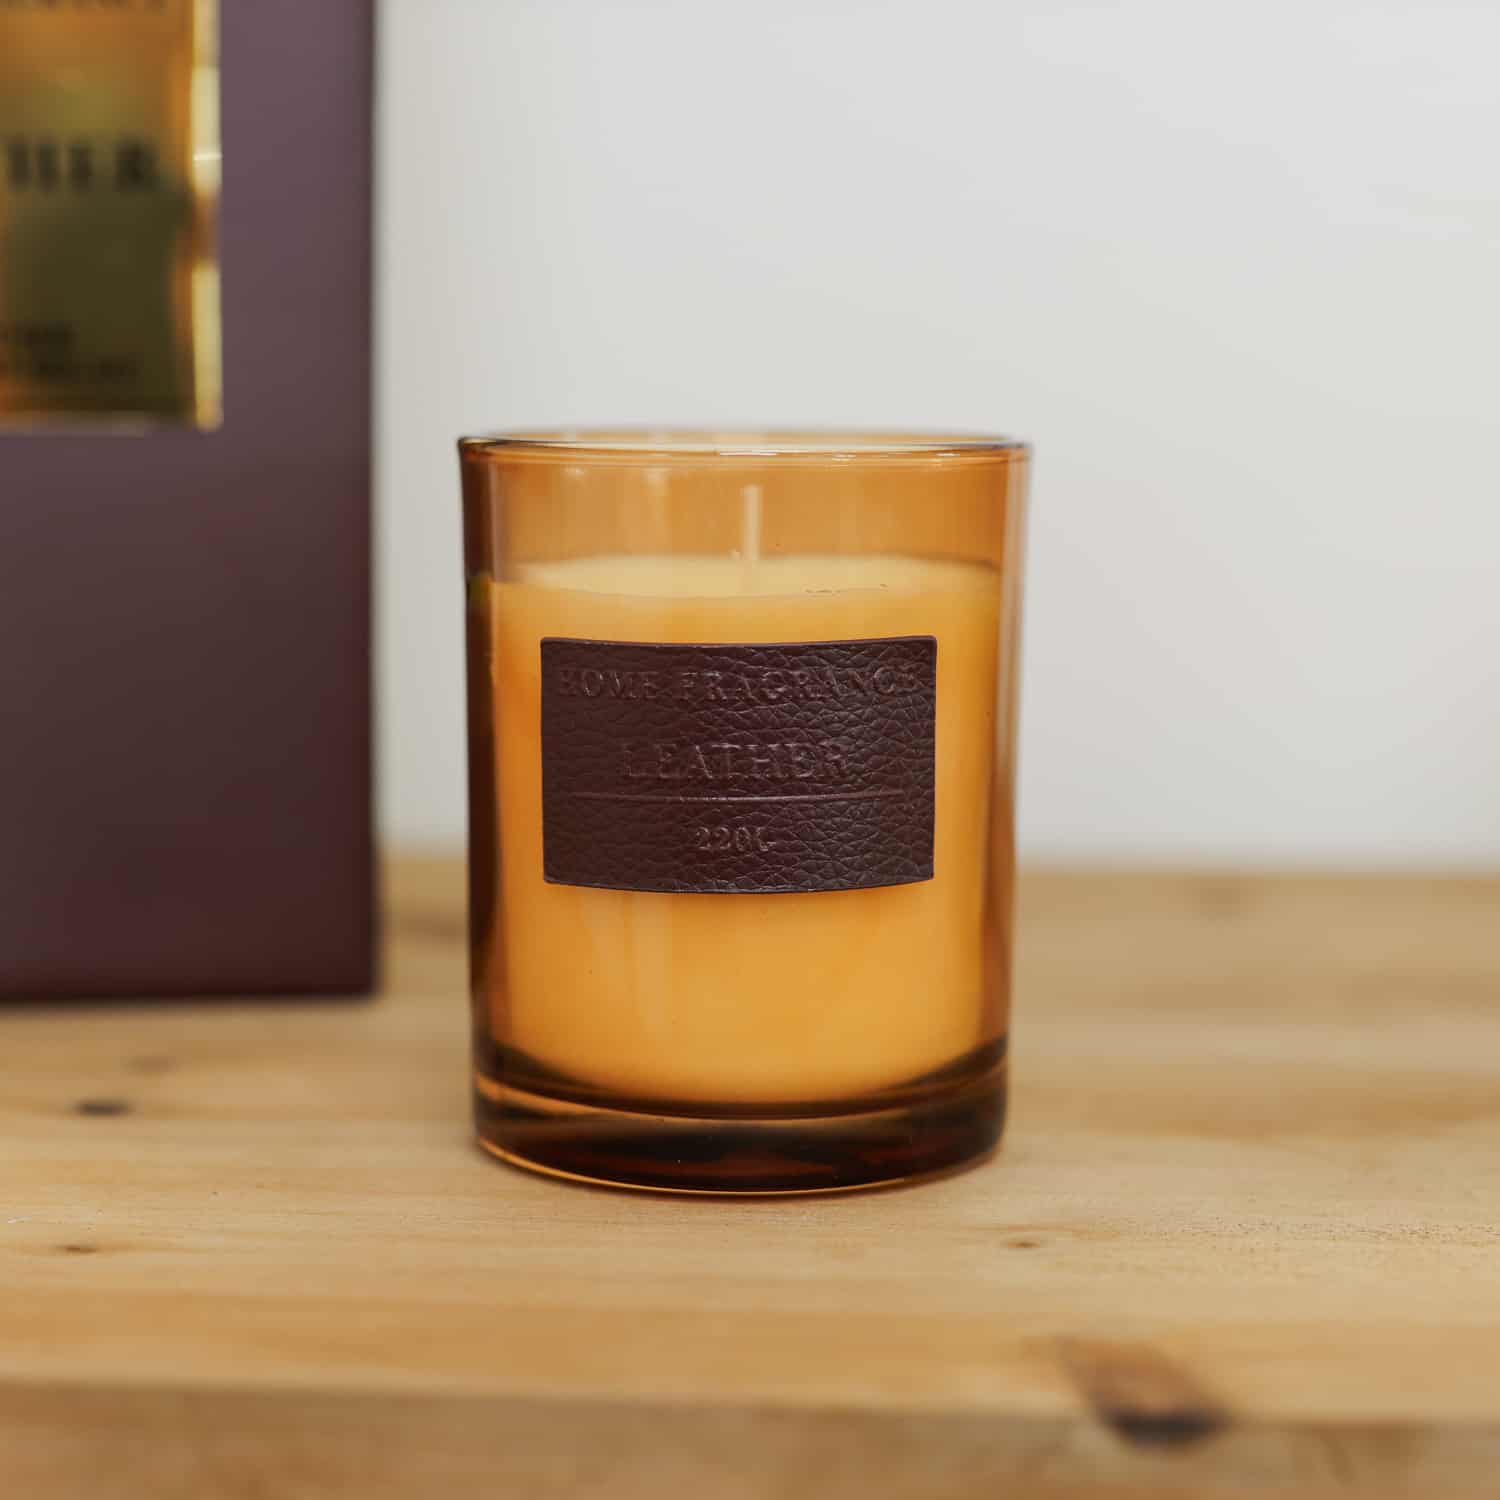 Vintage Leather Candle in orange jar on wooden console.